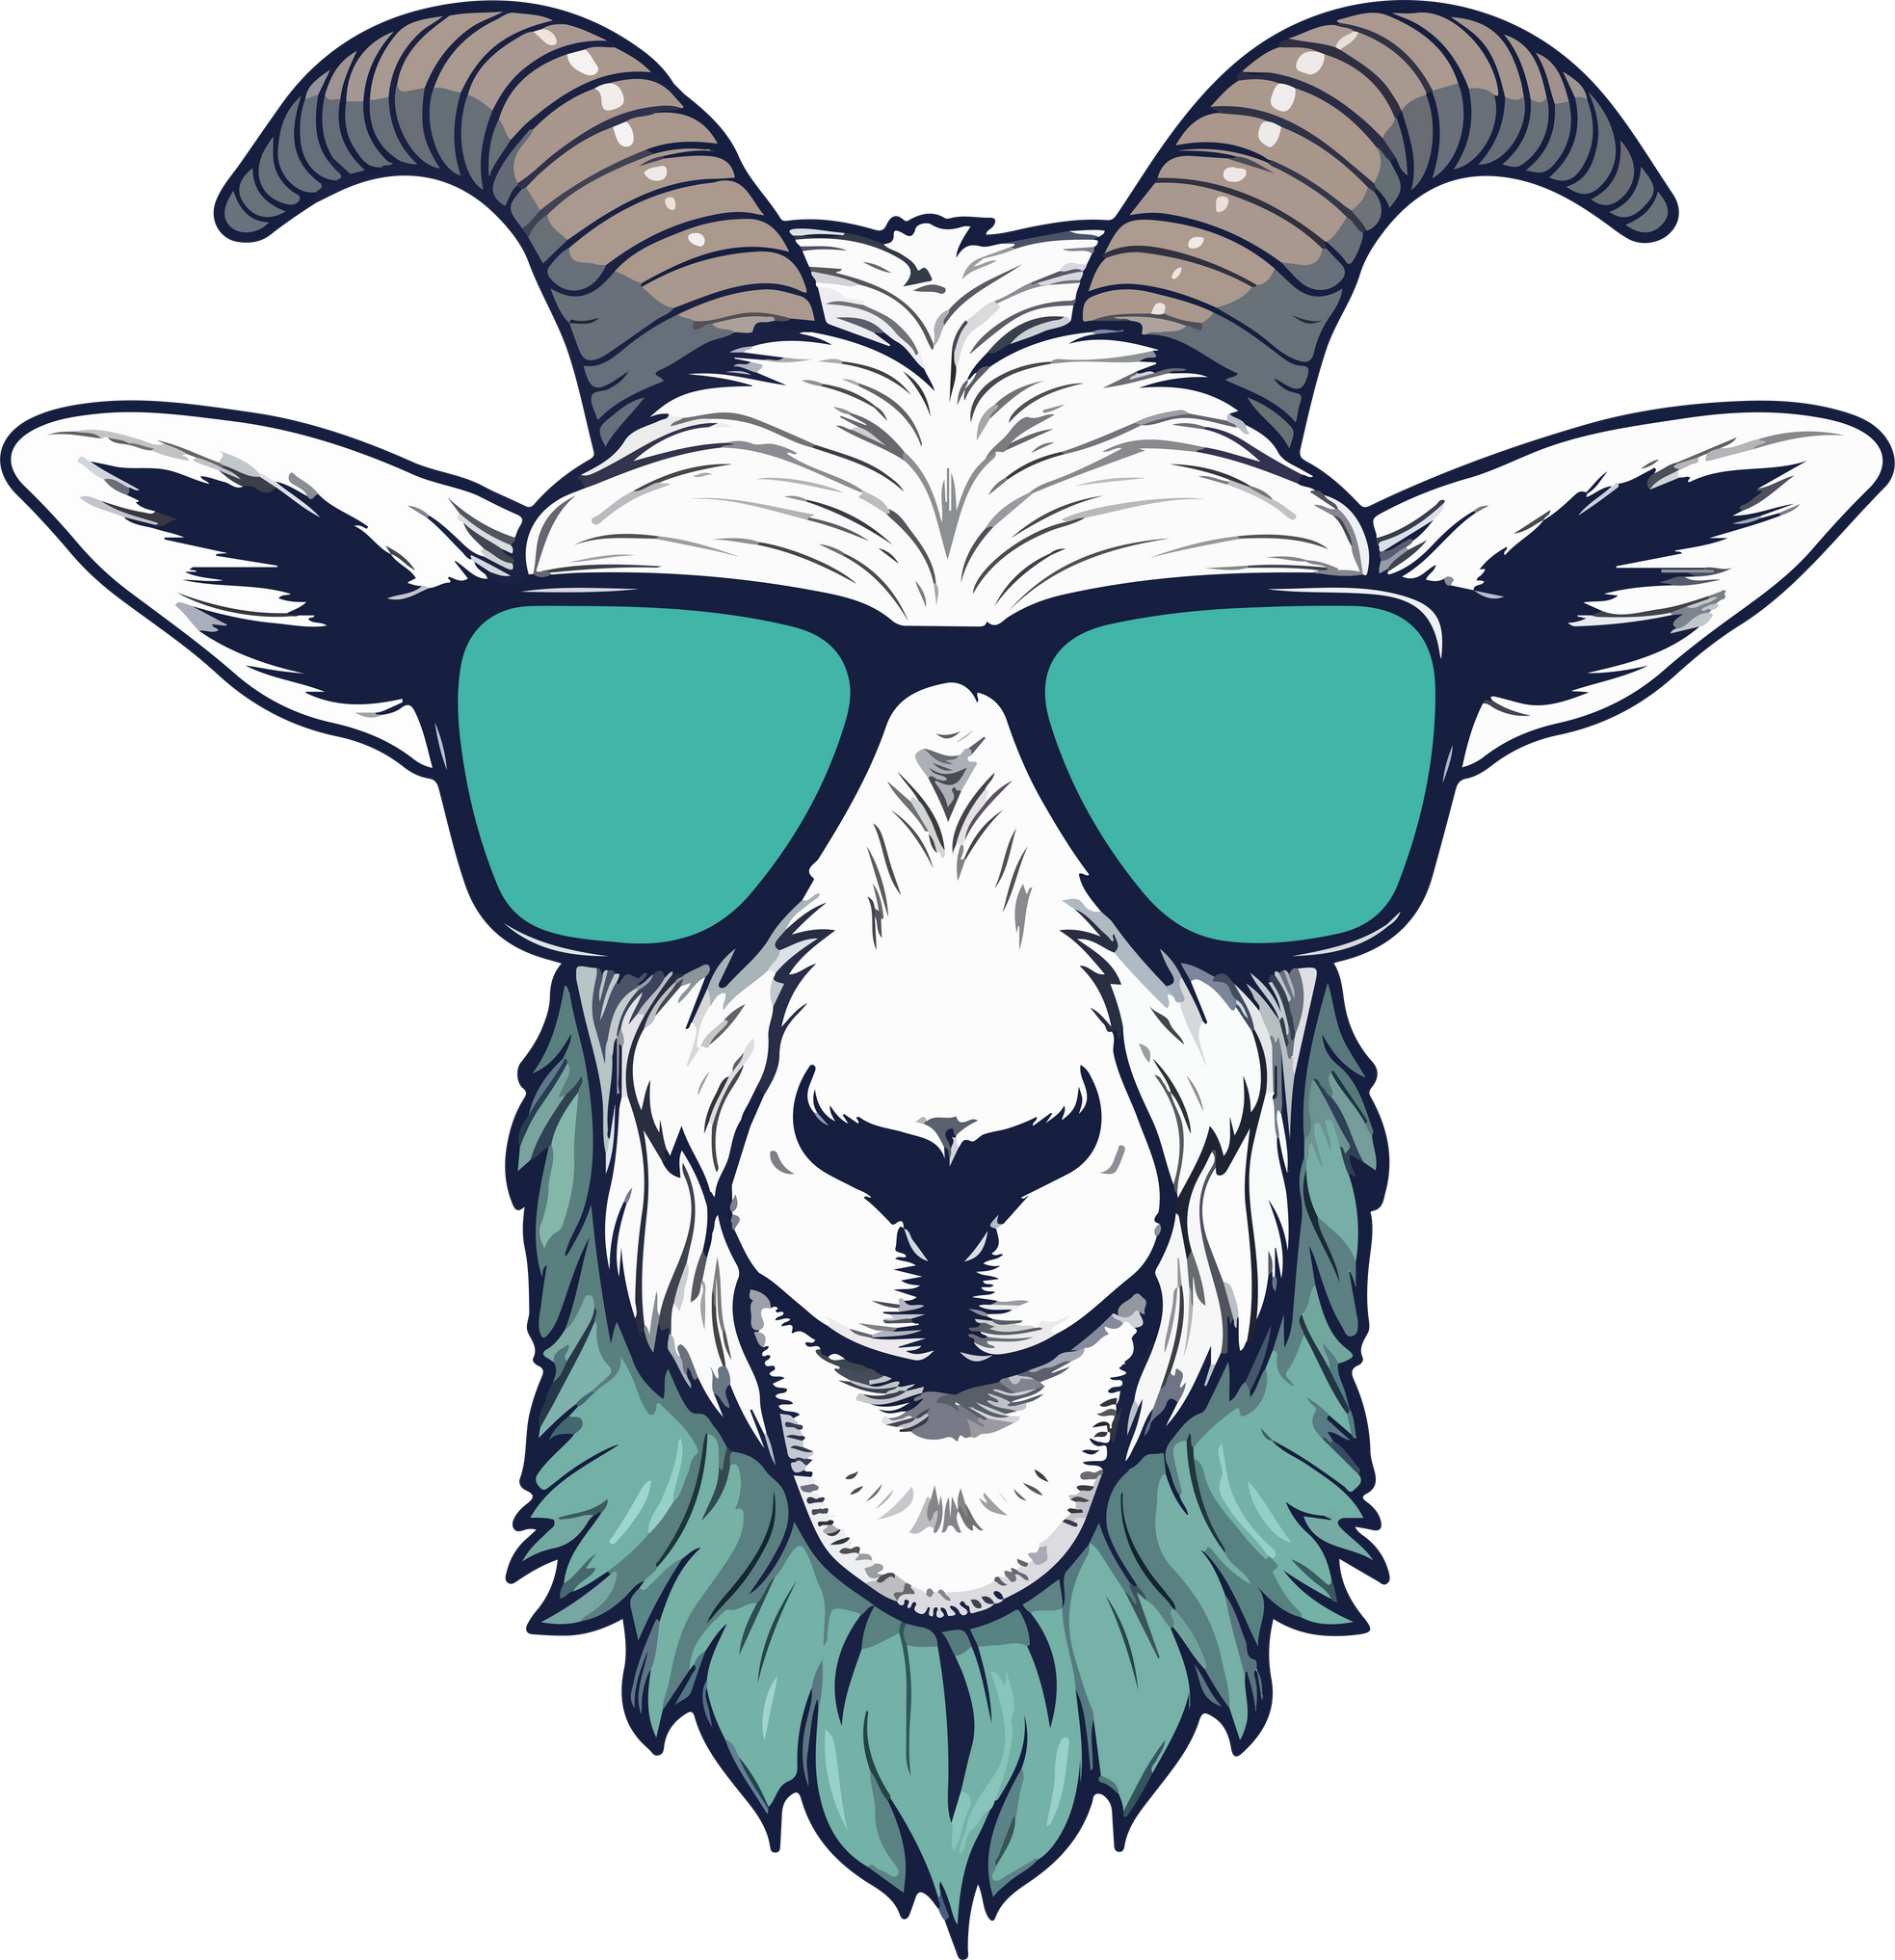 Goat Head Logo with glasses